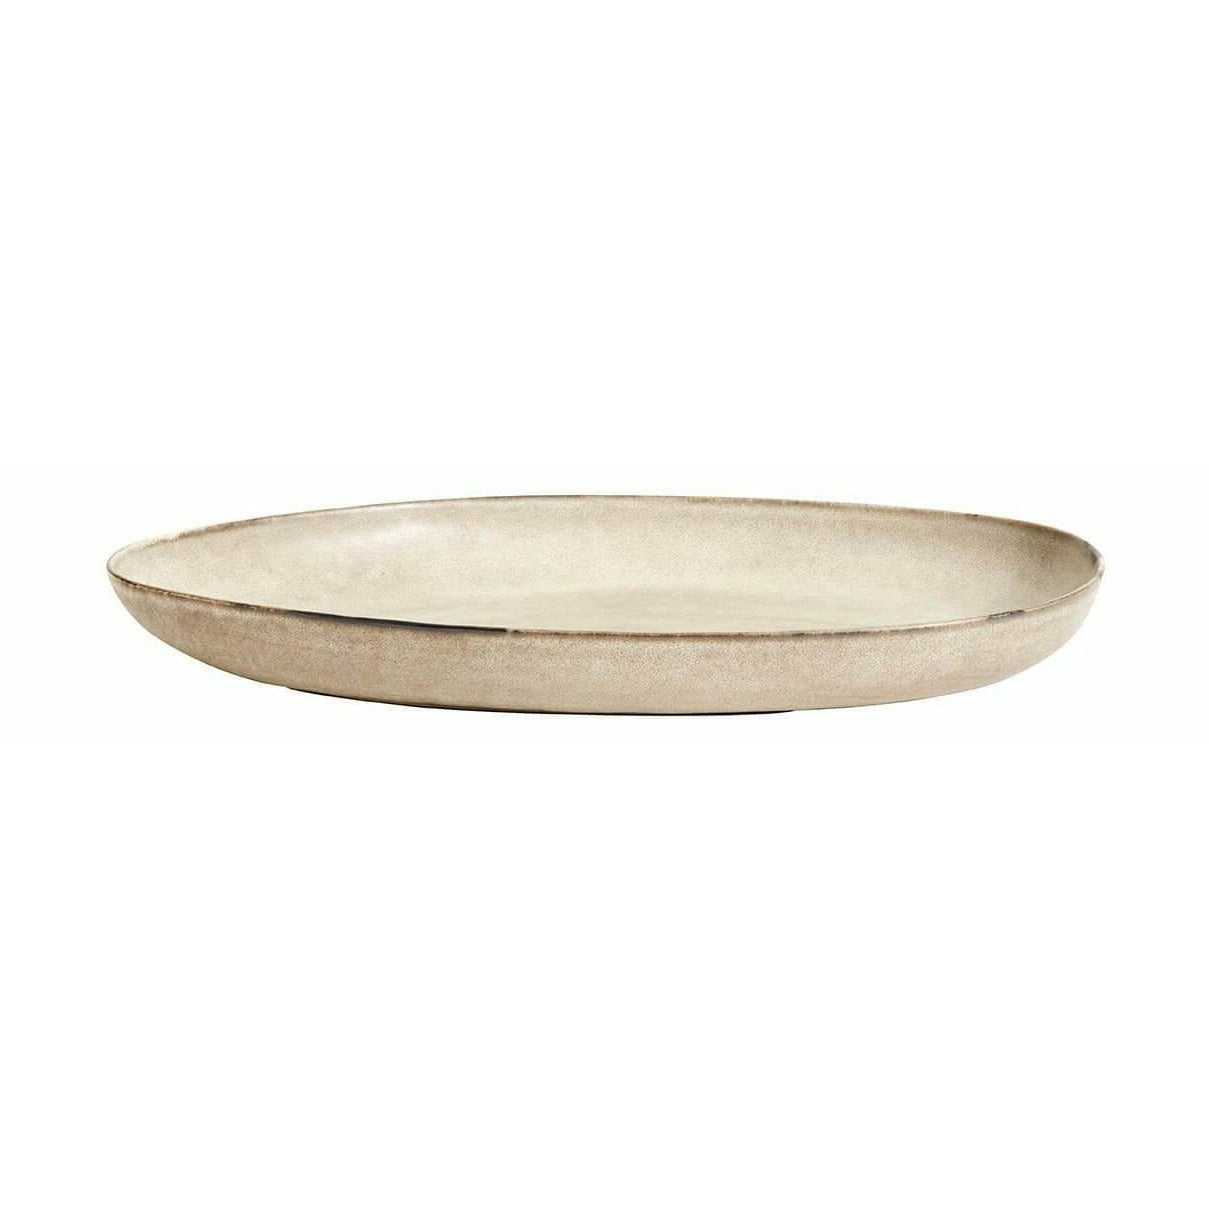 Muubs Mame Serving Plate Oval Auster, 43 cm